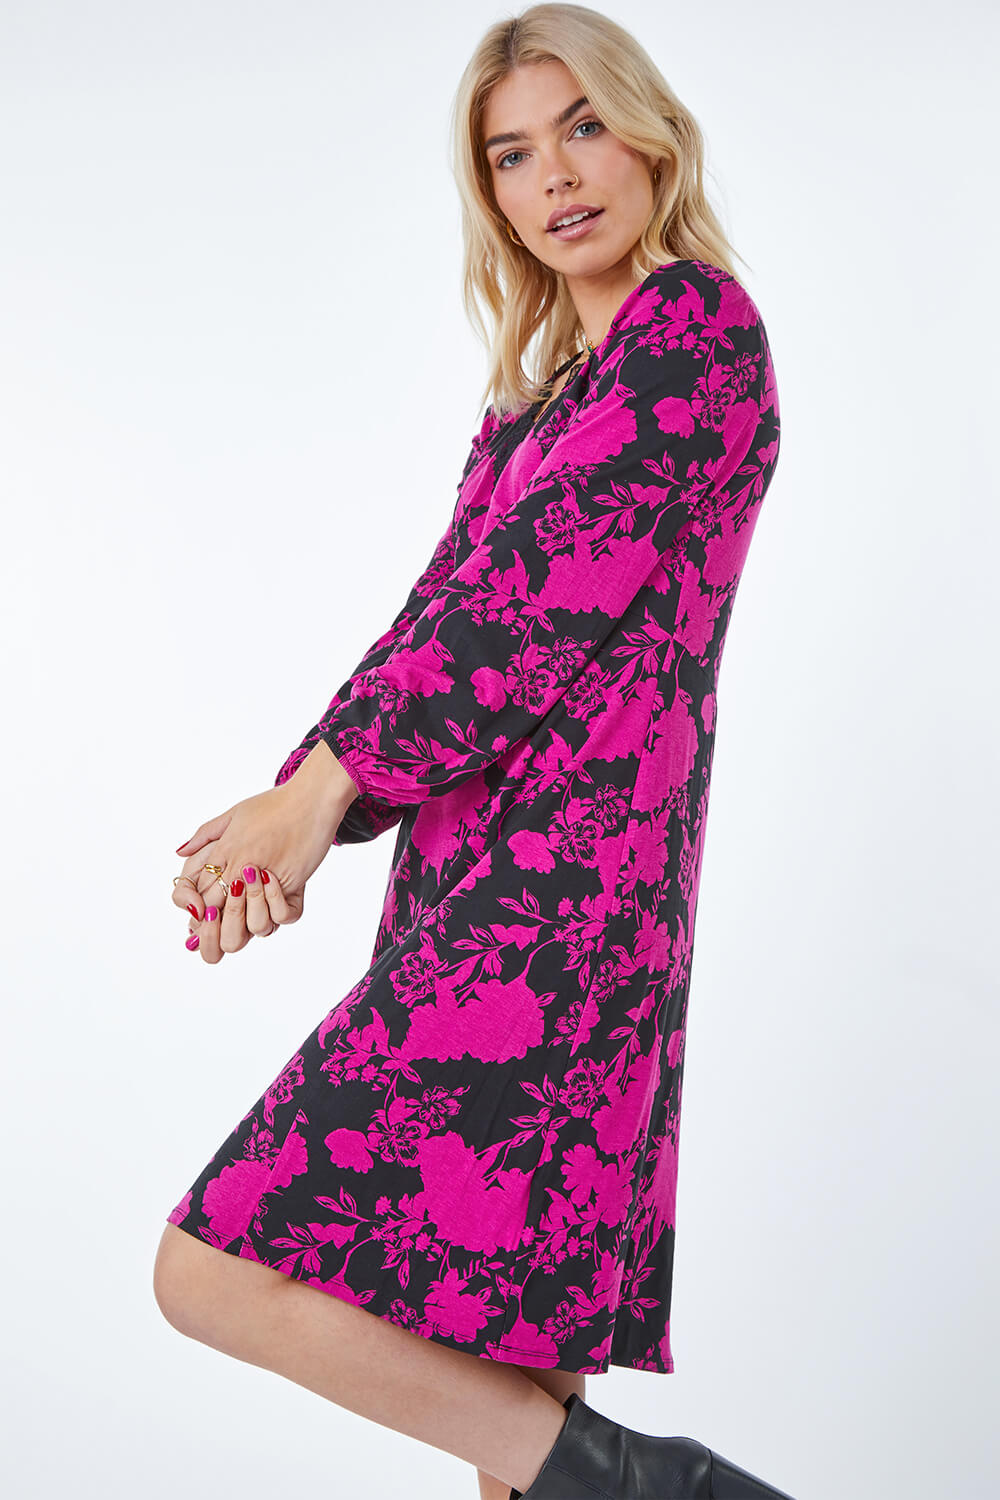 Fushcia Floral Lace Trim Jersey Dress, Image 2 of 5